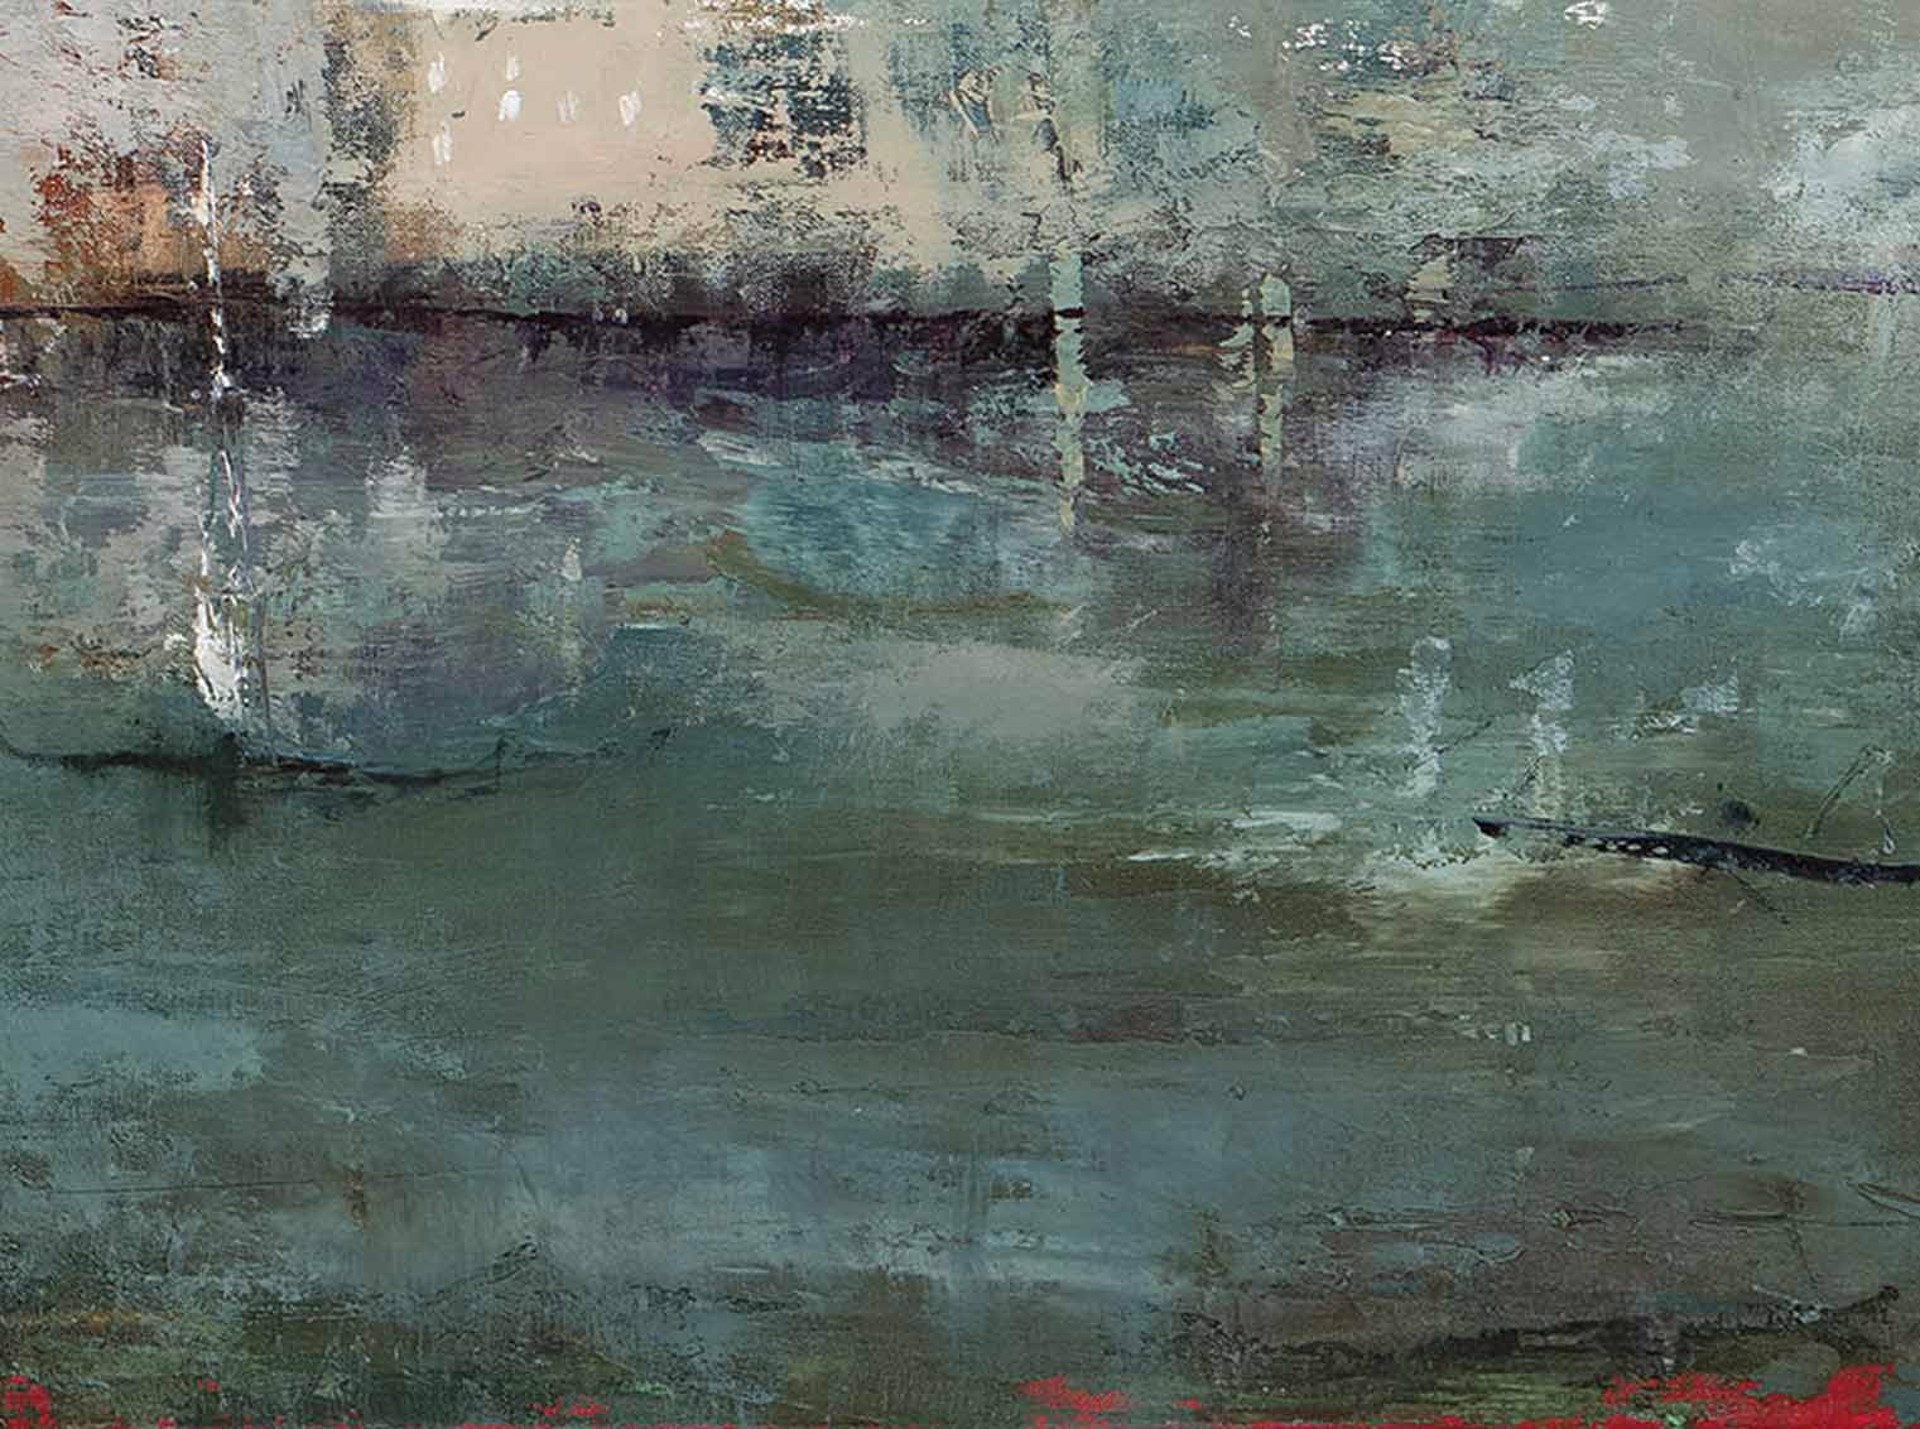 Down Silent Courts and Secret Passages by France Jodoin